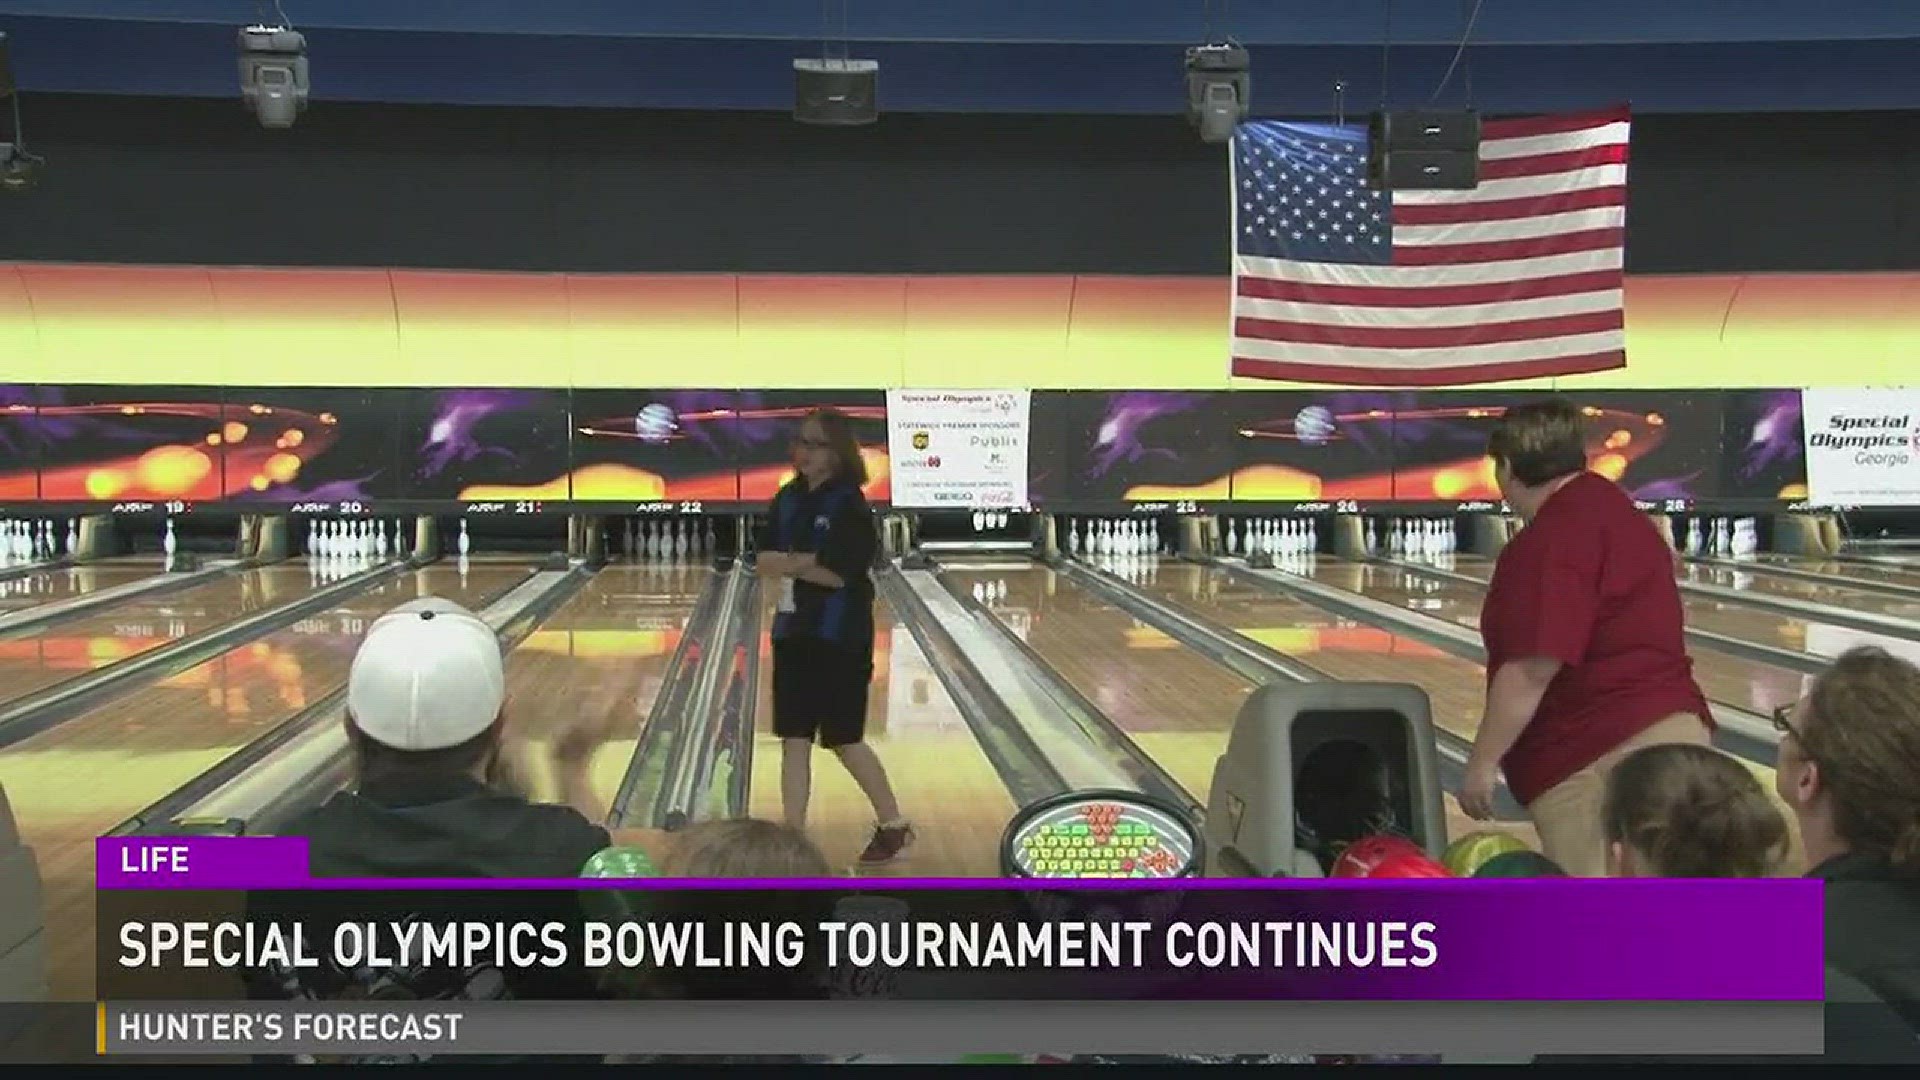 Special Olympics Bowling Tournament continues in Warner Robins